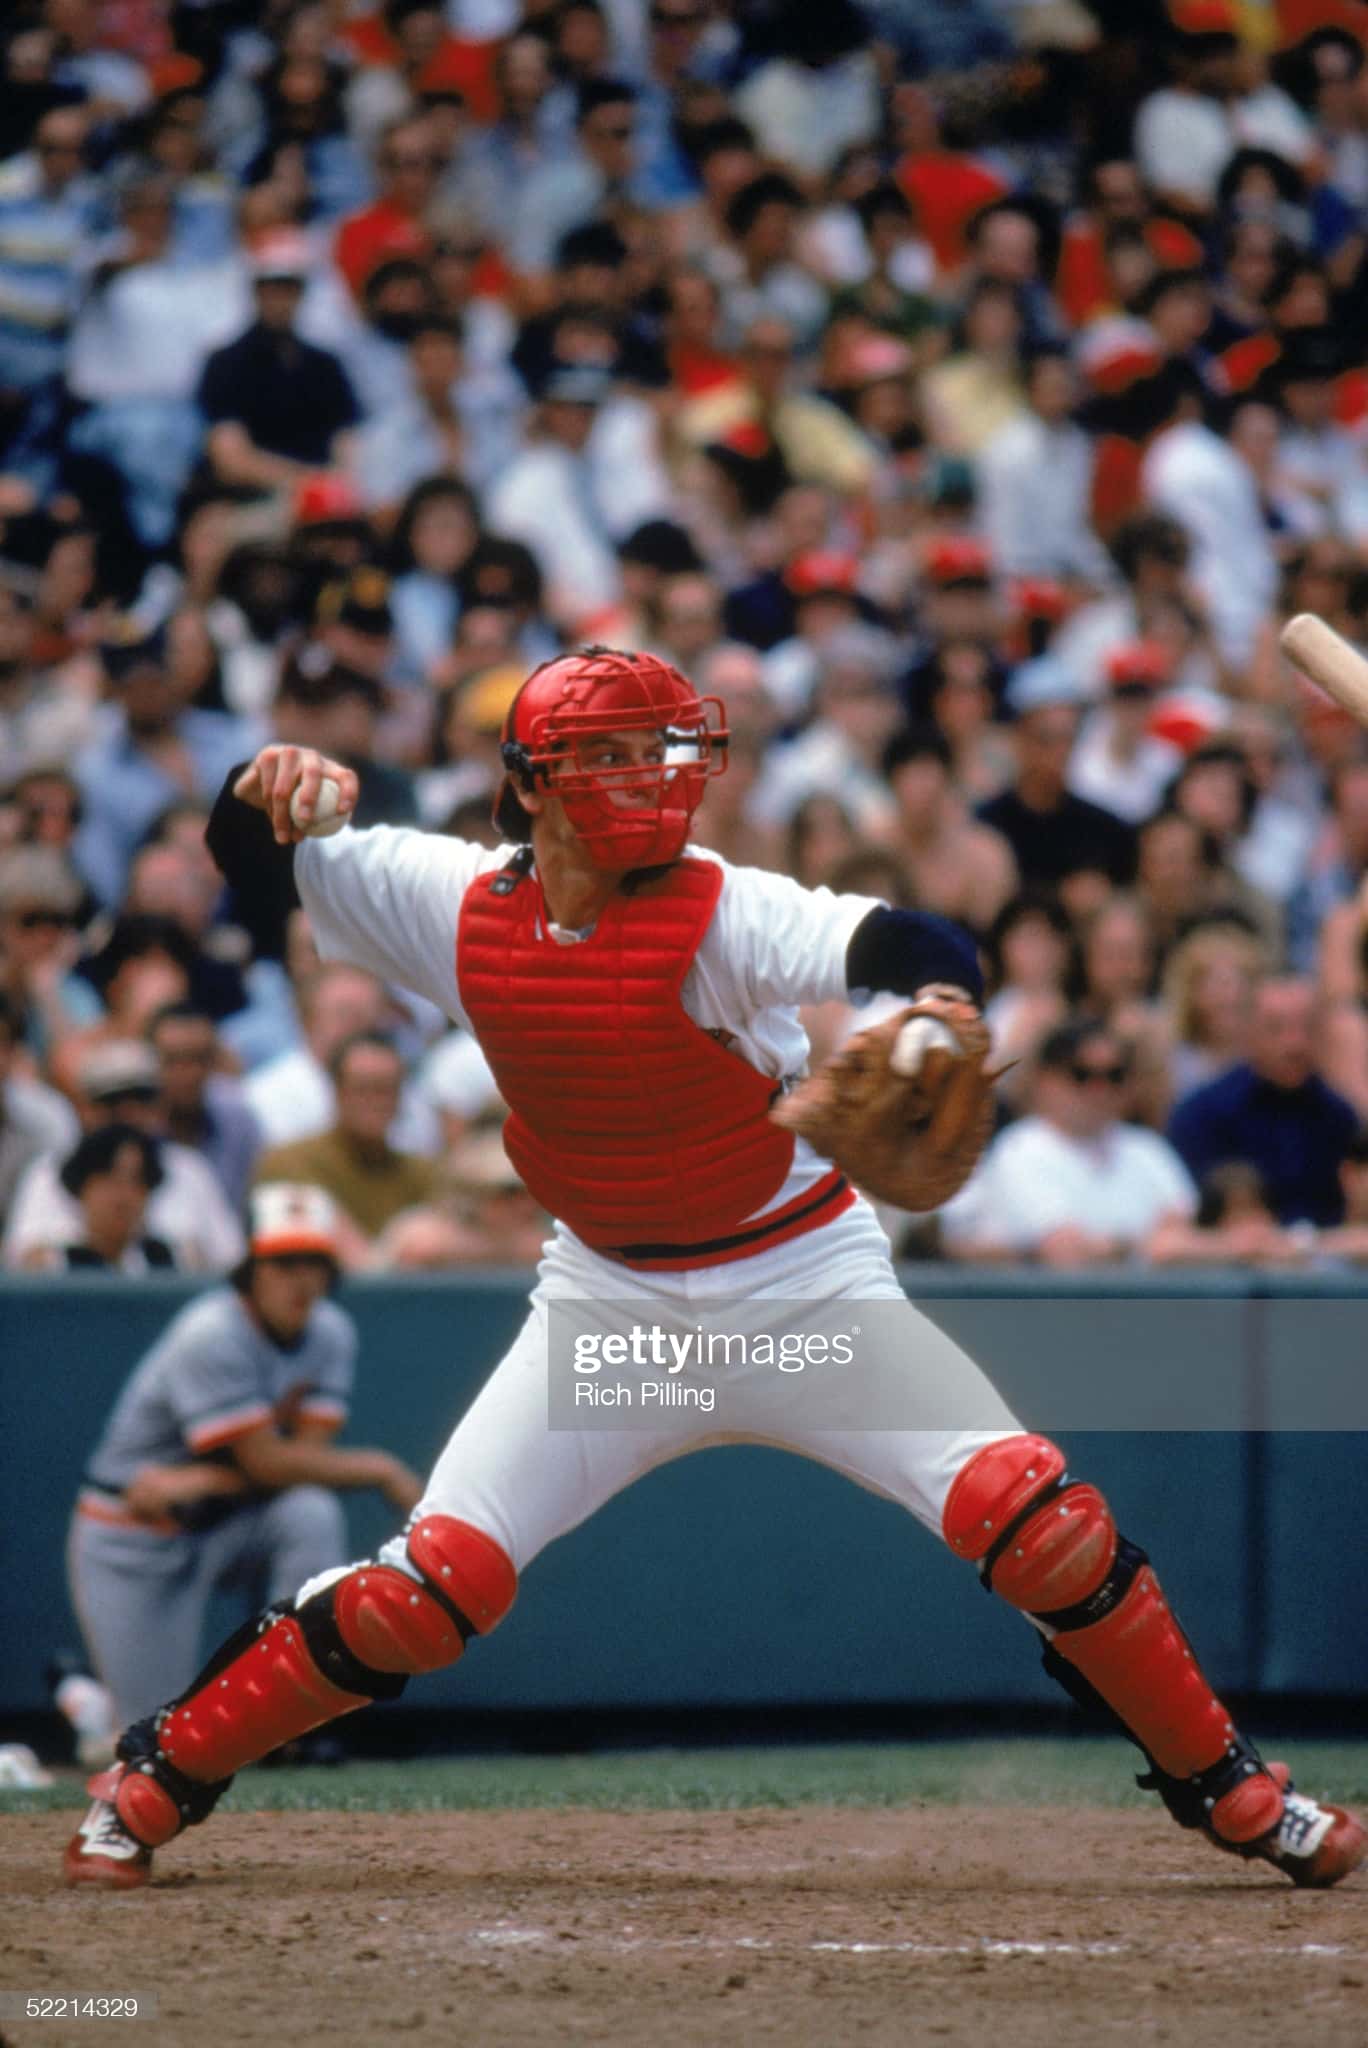 hall of fame catcher carlton fisk in 1978 throwing